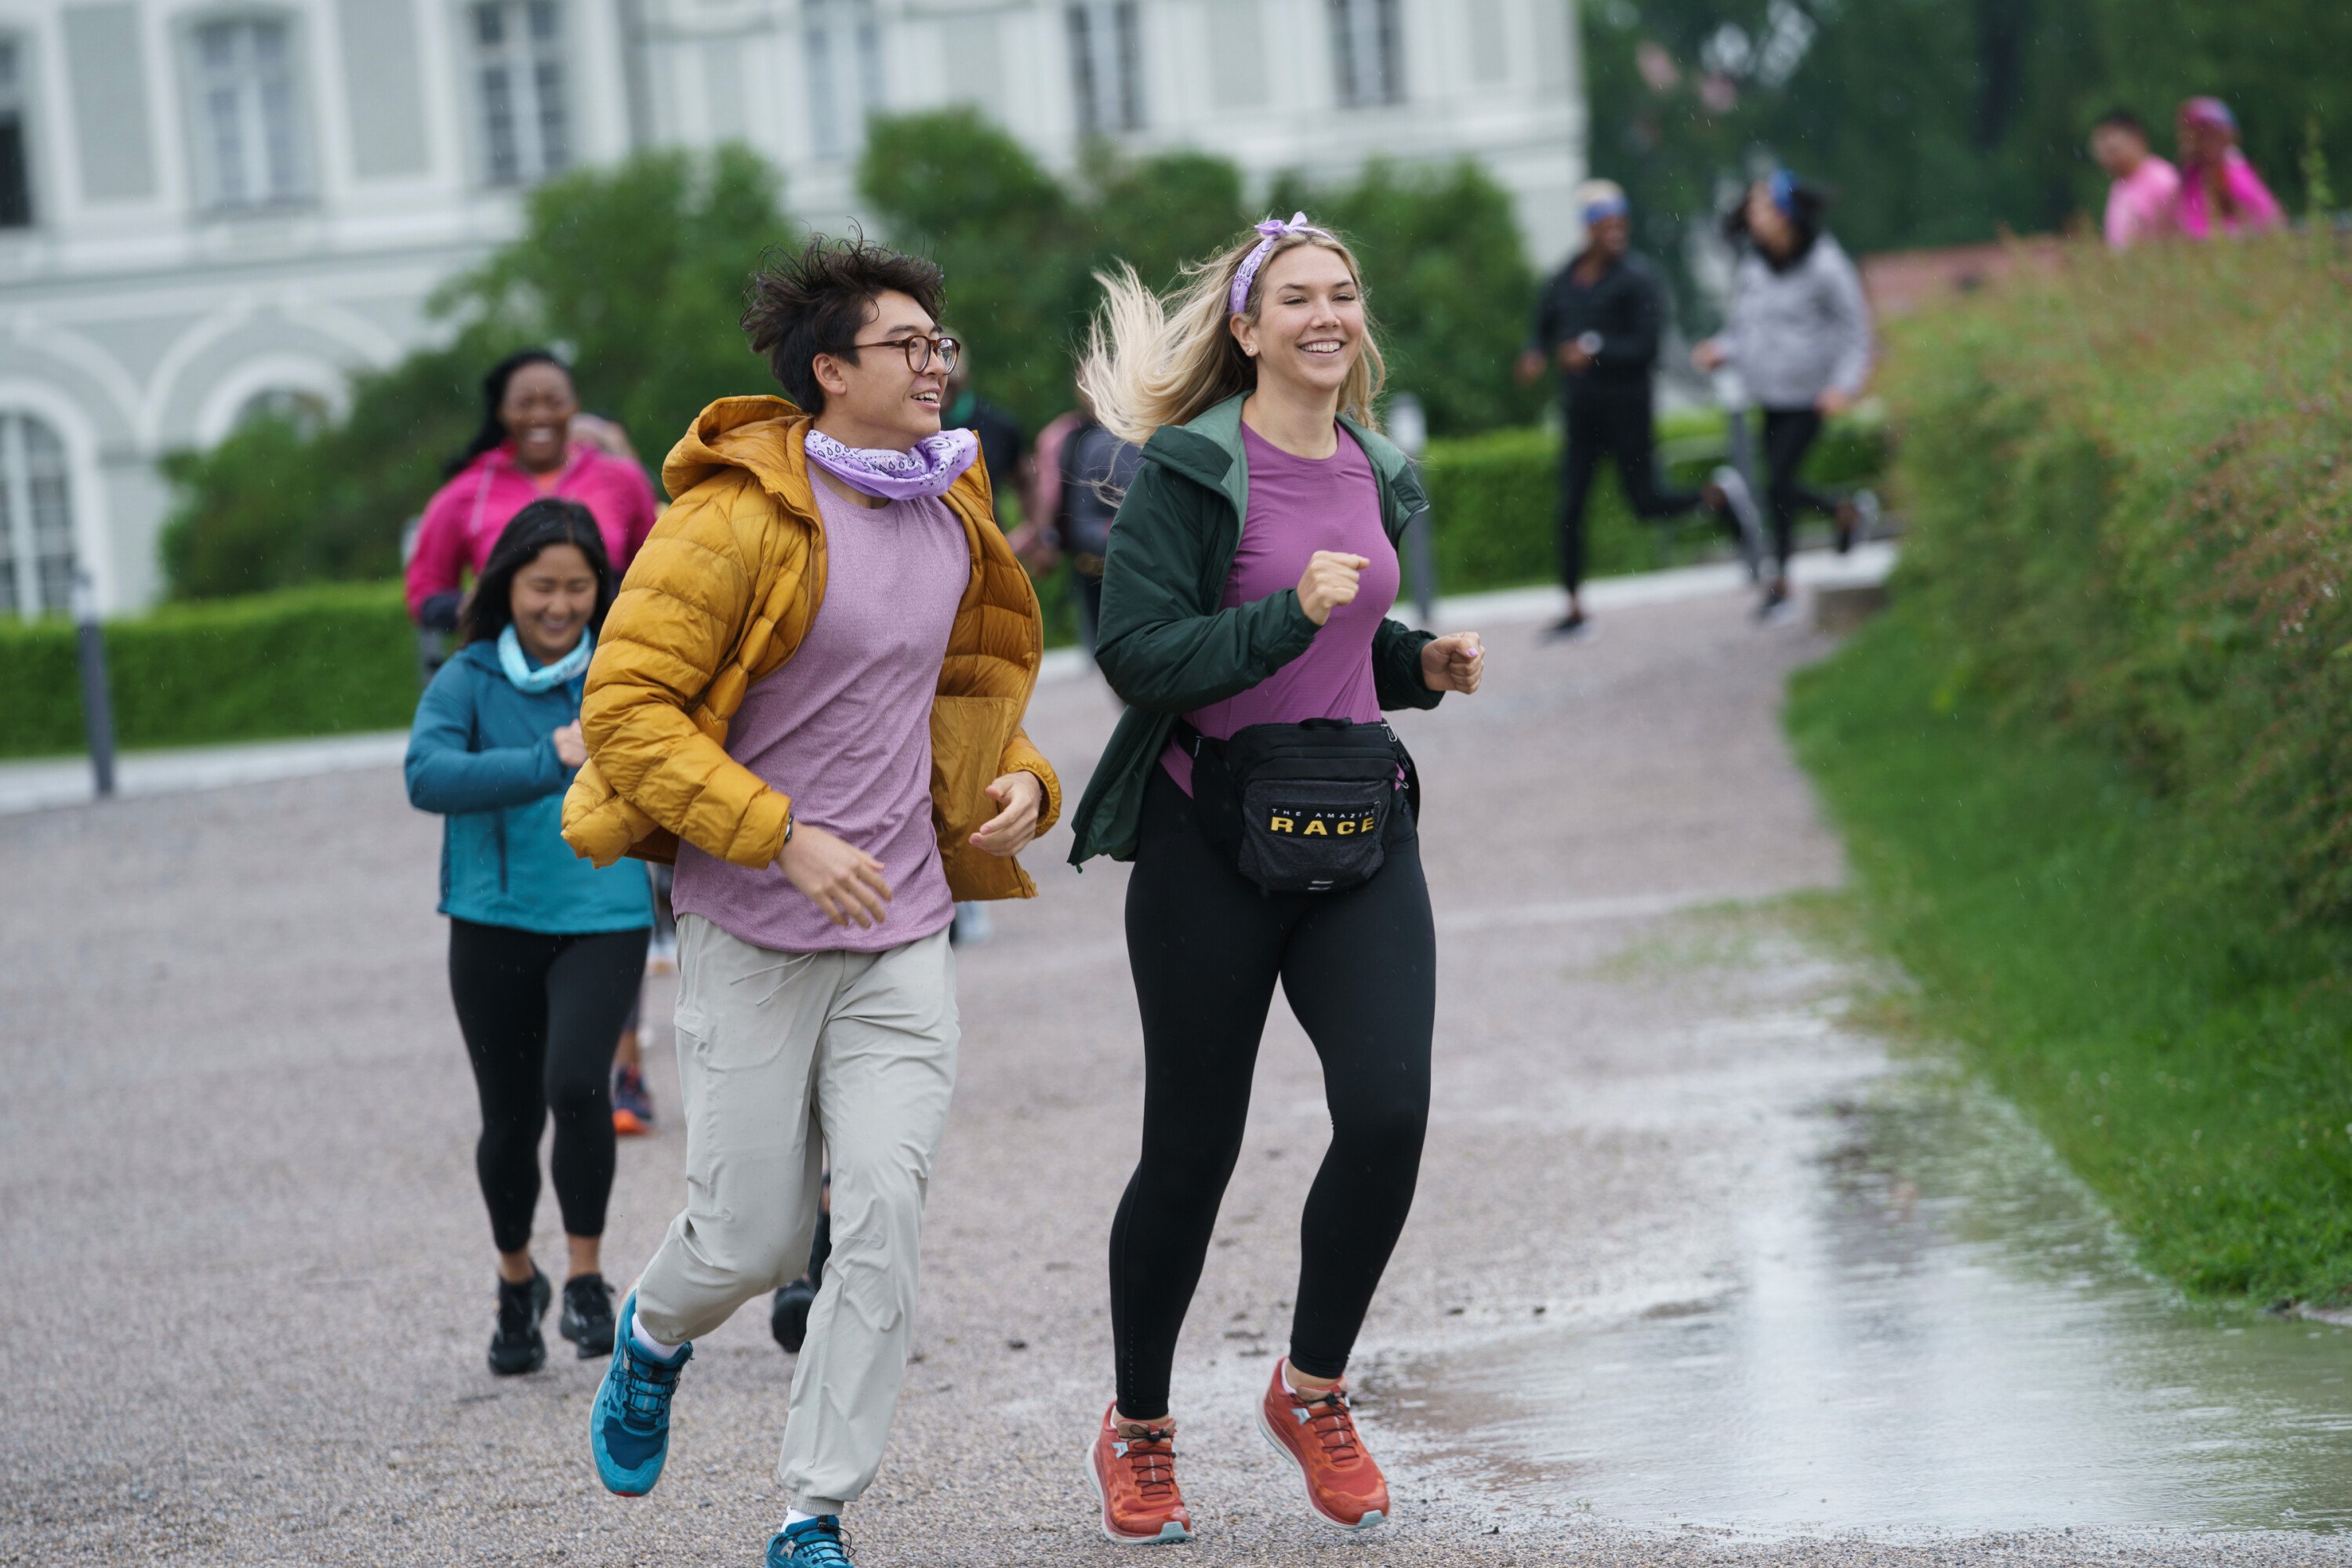 Derek Xiao and Claire Rehfuss, who star in 'The Amazing Race' Season 34 on CBS, run to the starting line. Derek wears a mustard yellow jacket over a light purple shirt and gray sweatpants. Claire wears a dark green jacket over a purple shirt and black leggings.